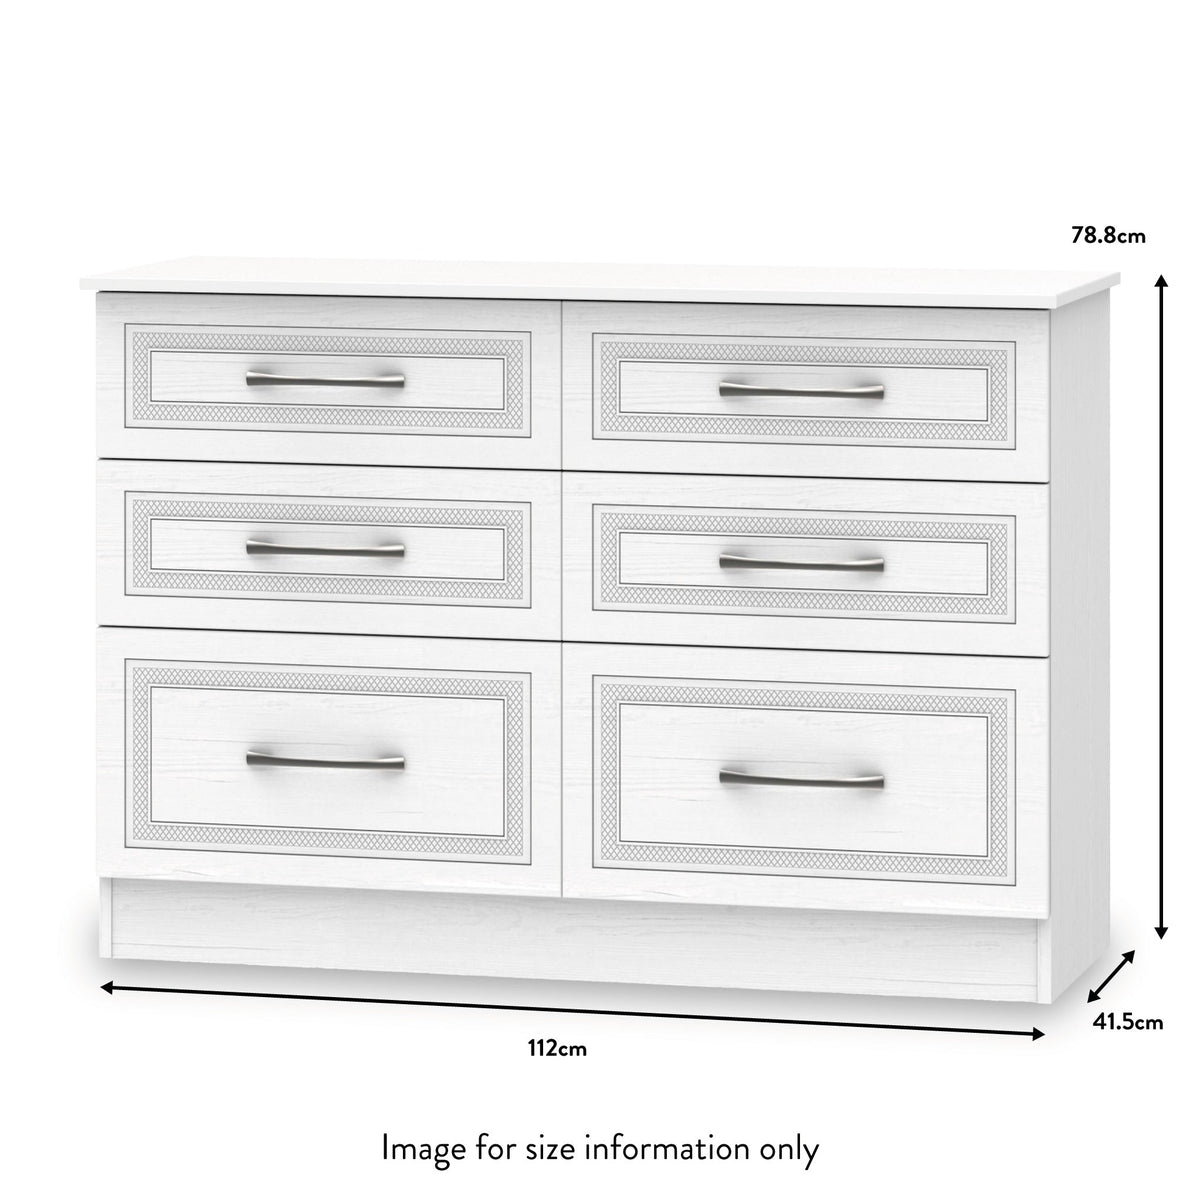 Killgarth White Wide chest of drawers dimensions